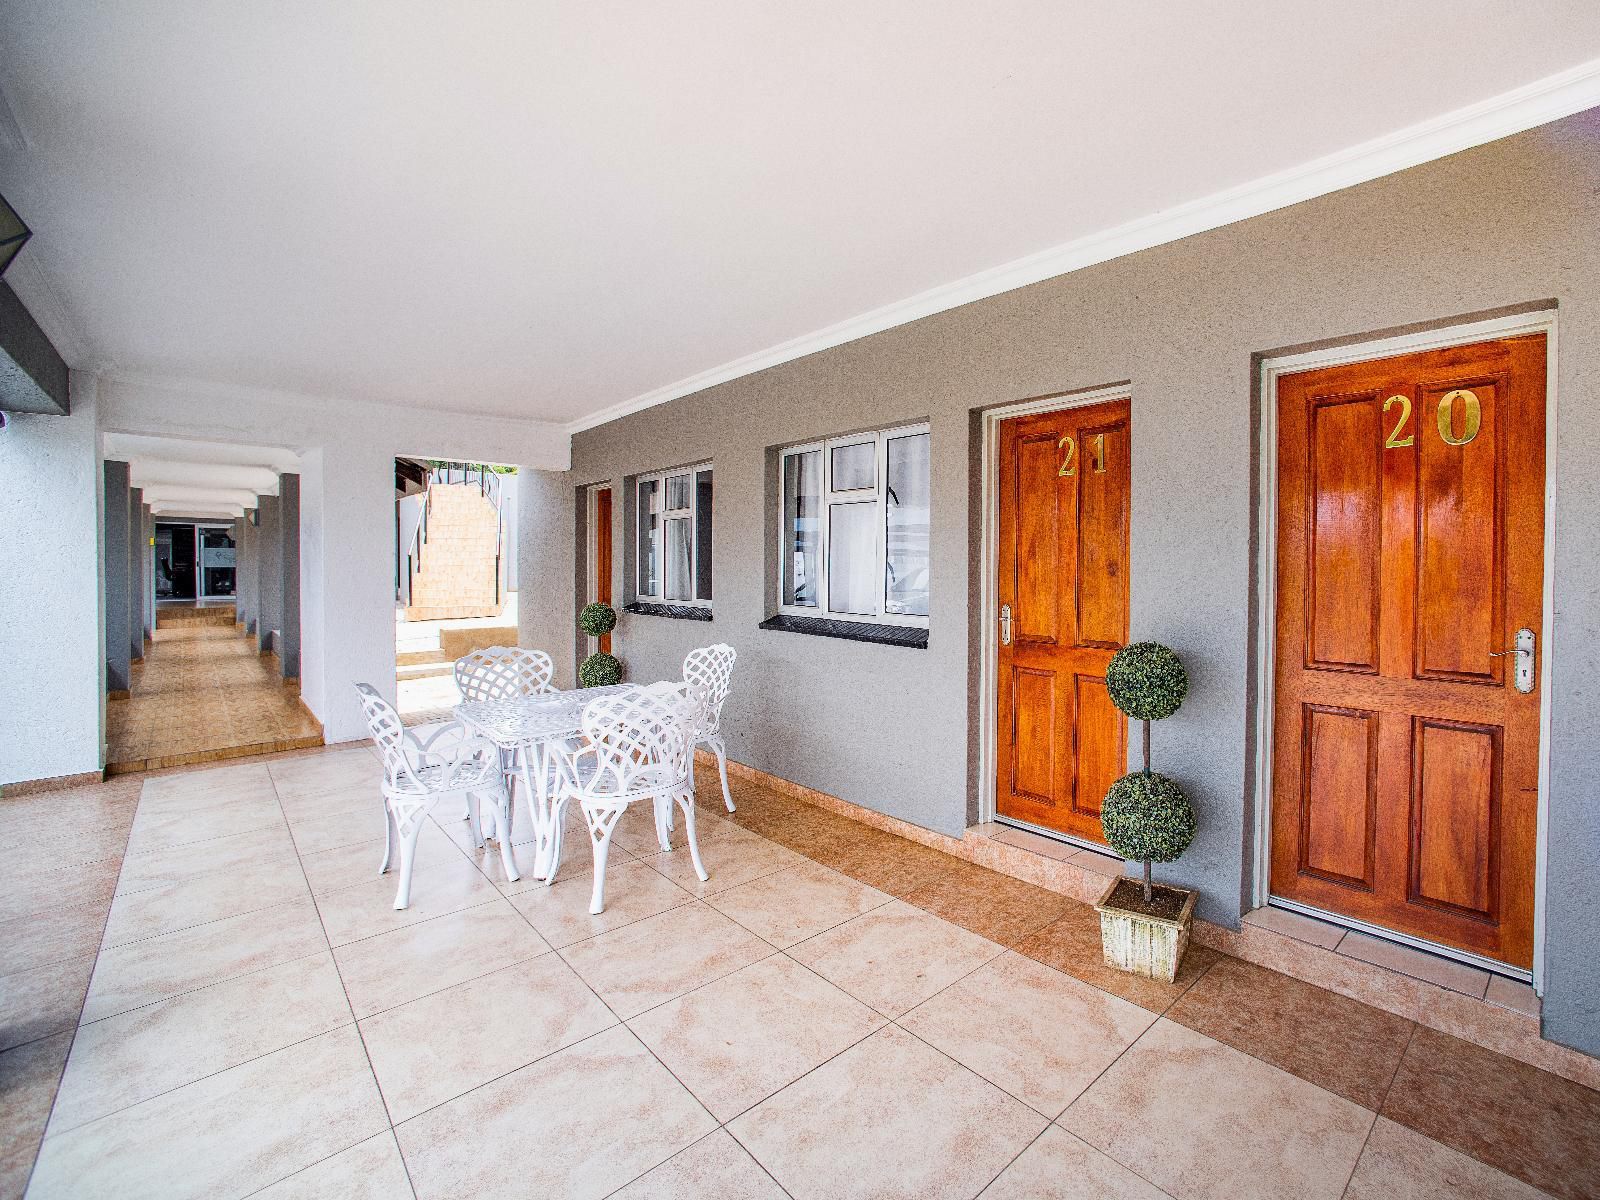 Khayalami Hotels Ermelo Ermelo Mpumalanga South Africa Door, Architecture, House, Building, Living Room